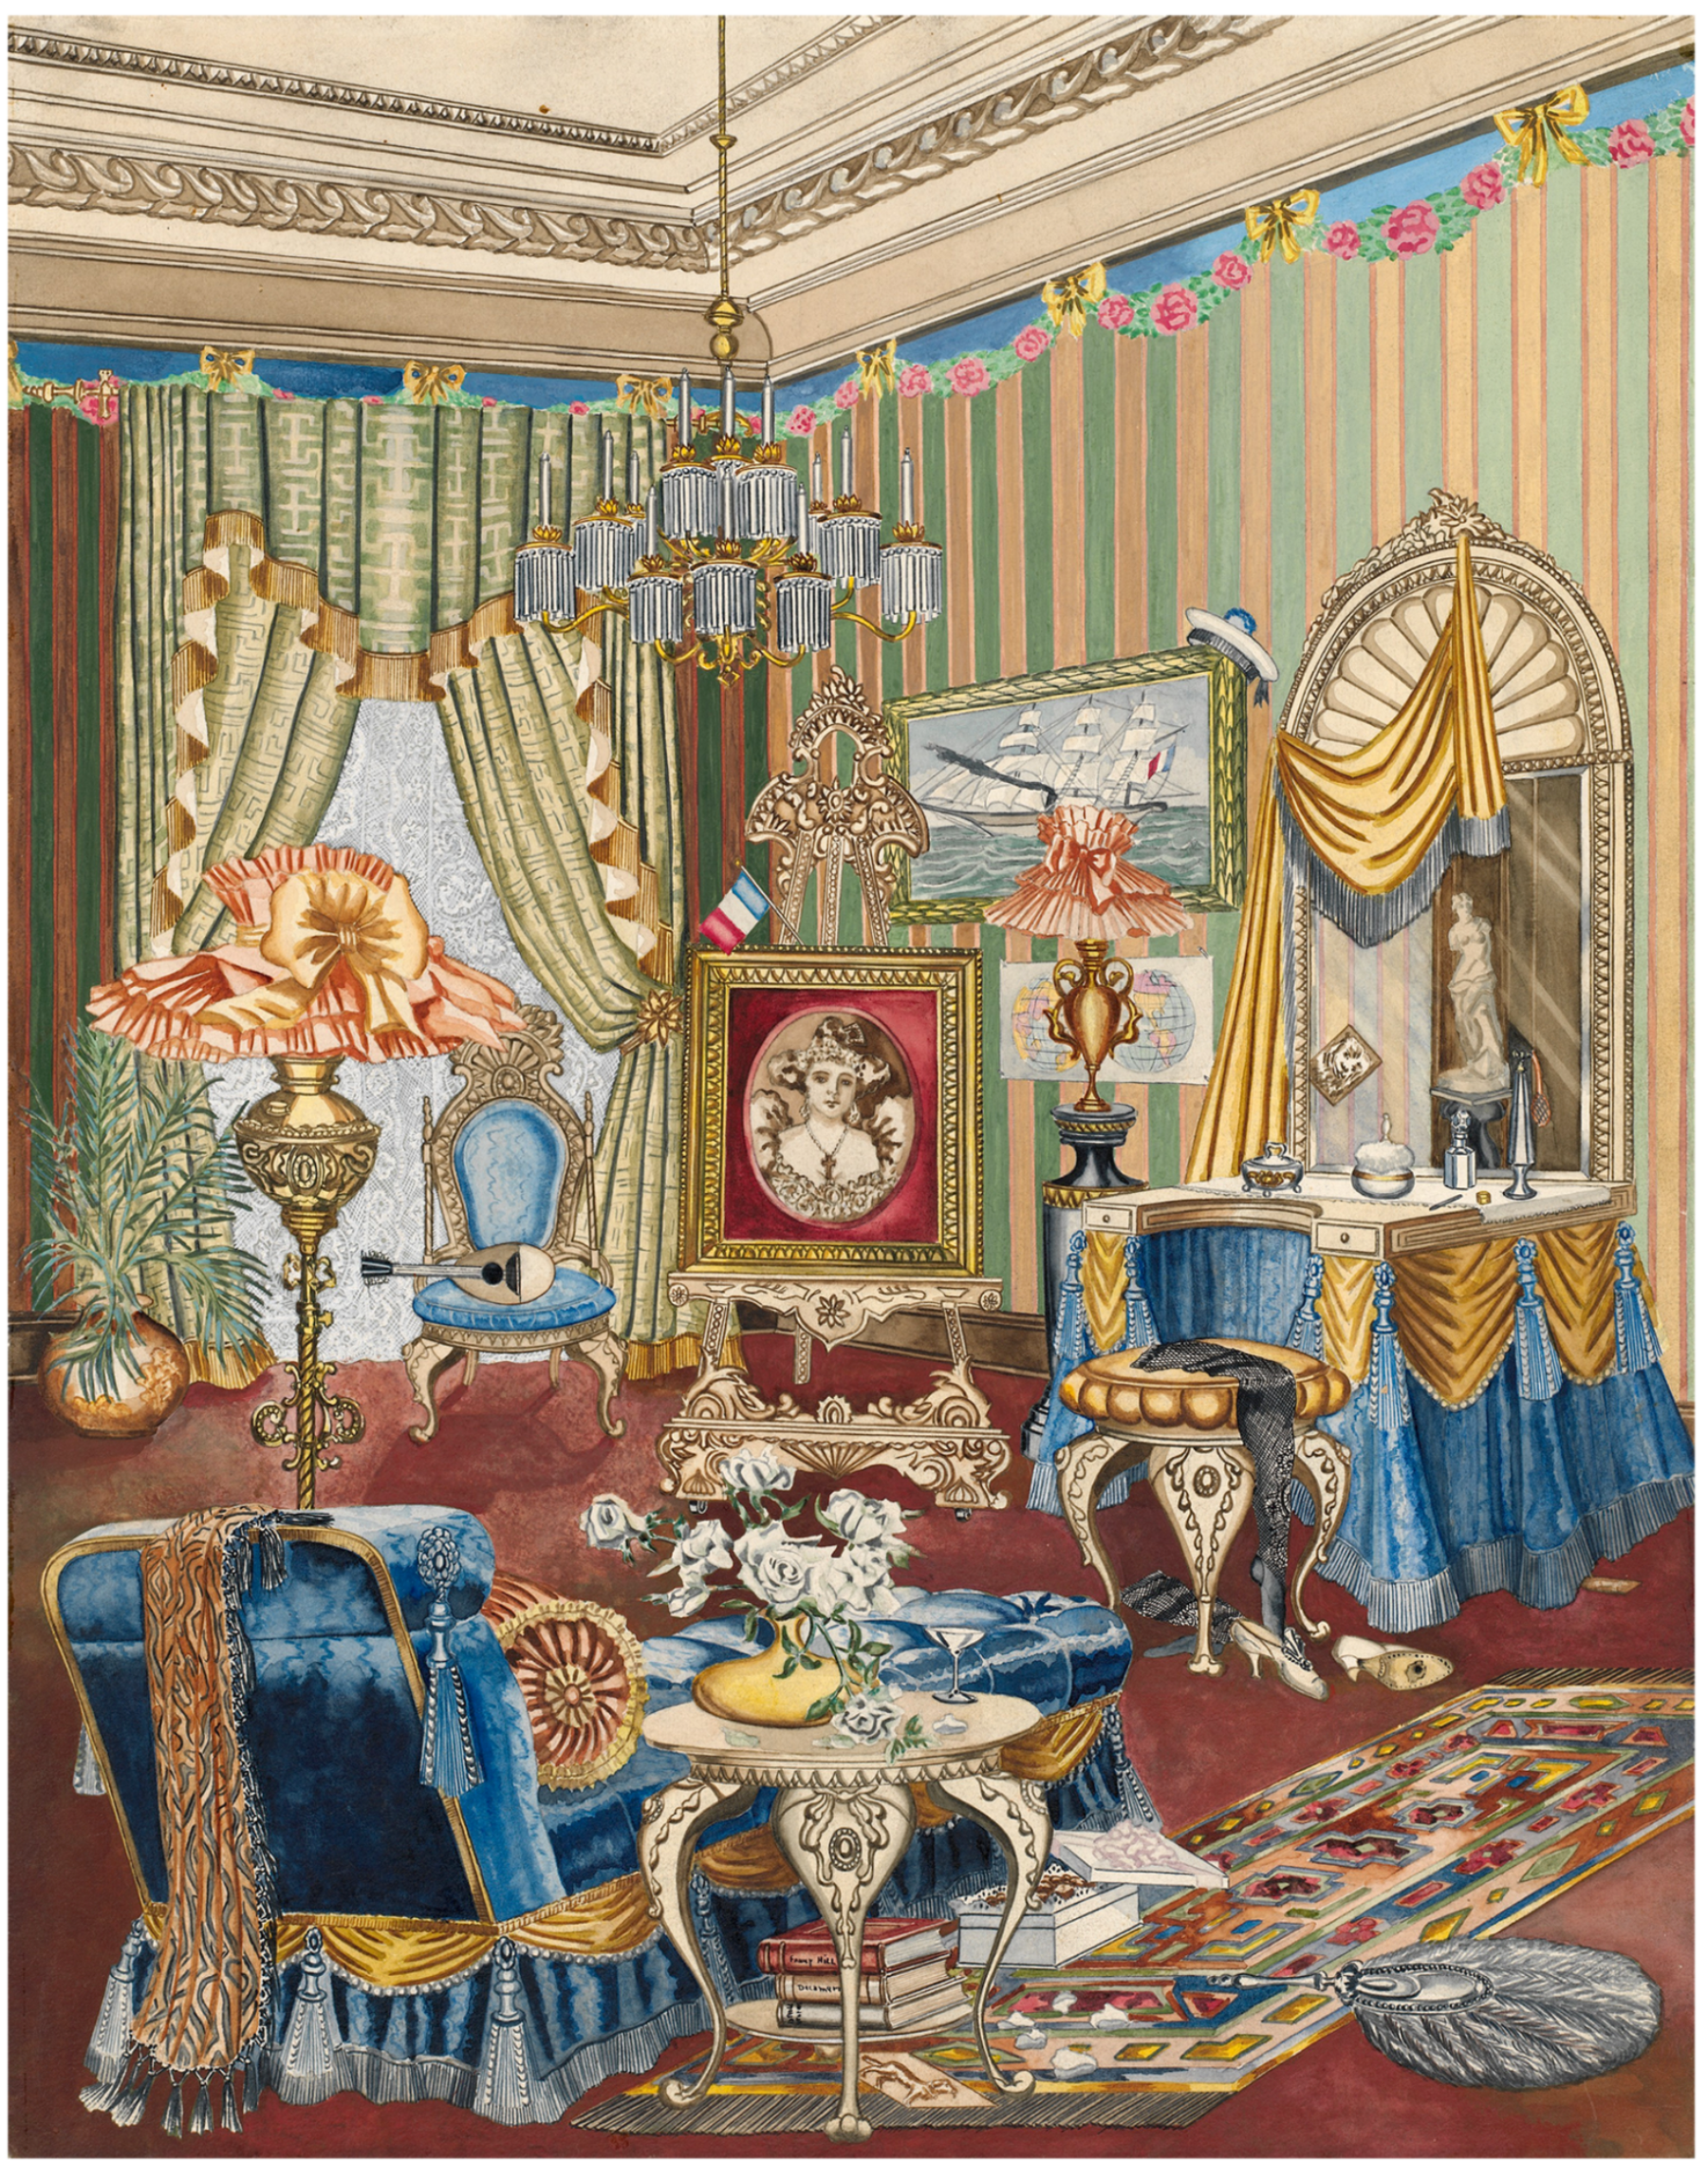 Perkins Harnly, Boudoir, c. 1931. Watercolor, gouache, and graphite on paper, 22 5/8 x 17 13/16 inches (57.5 x 45.3 cm). National Gallery of Art, Washington, Index of American Design, 1943.